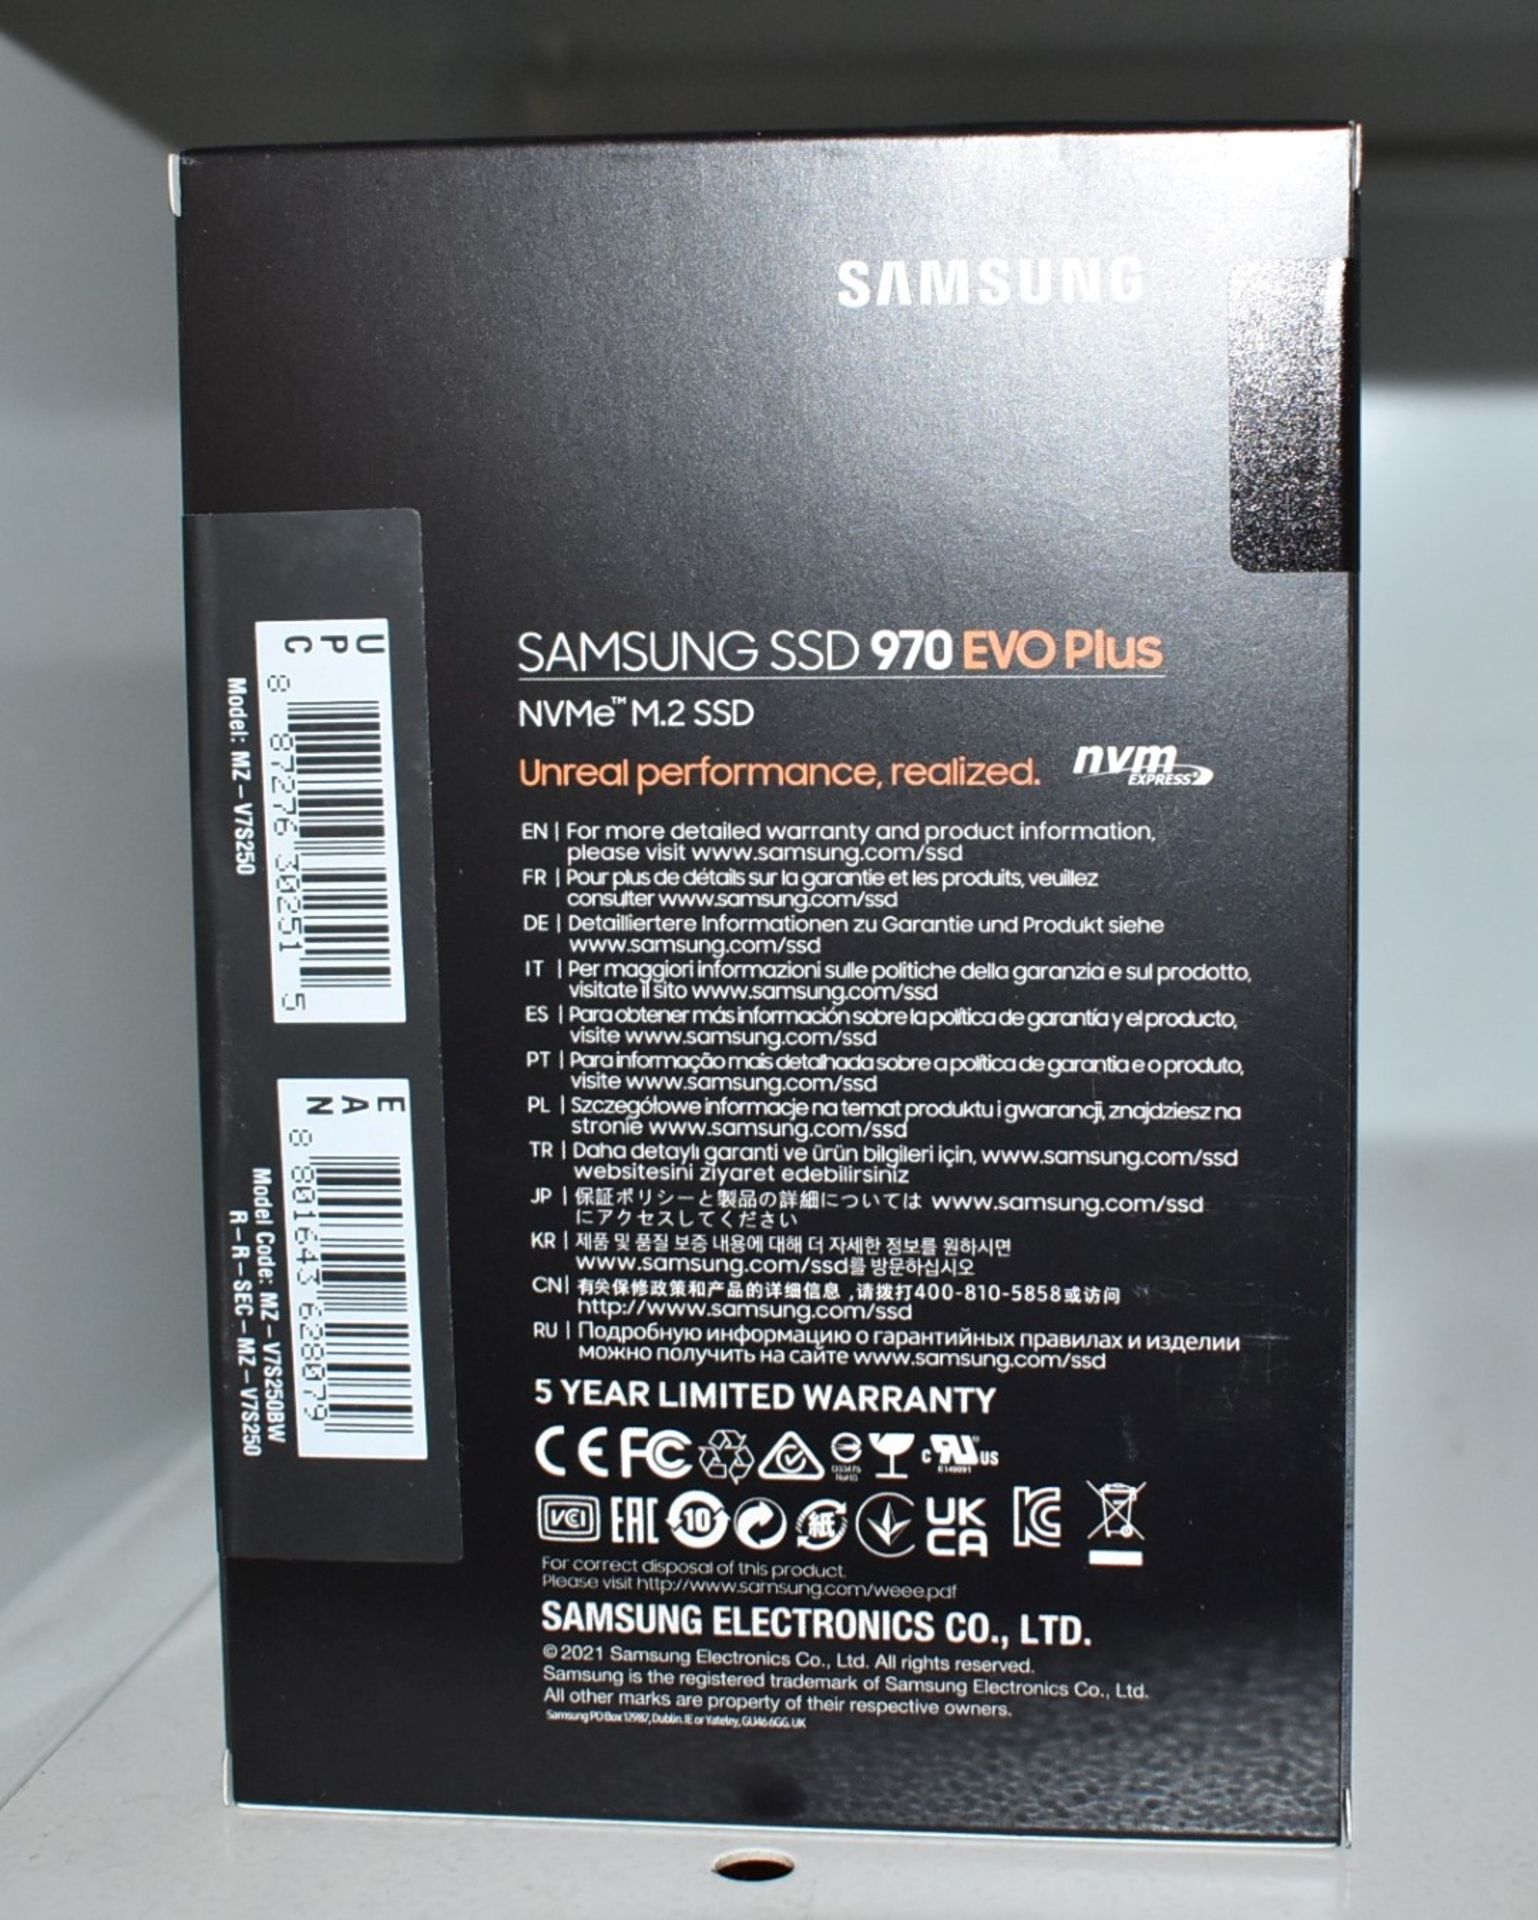 1 x Samsung Evo 970 Plus 250GB Solid State M.2 SSD Hard Drive - 3500mb/s Read Speed - New Boxed - Image 2 of 2